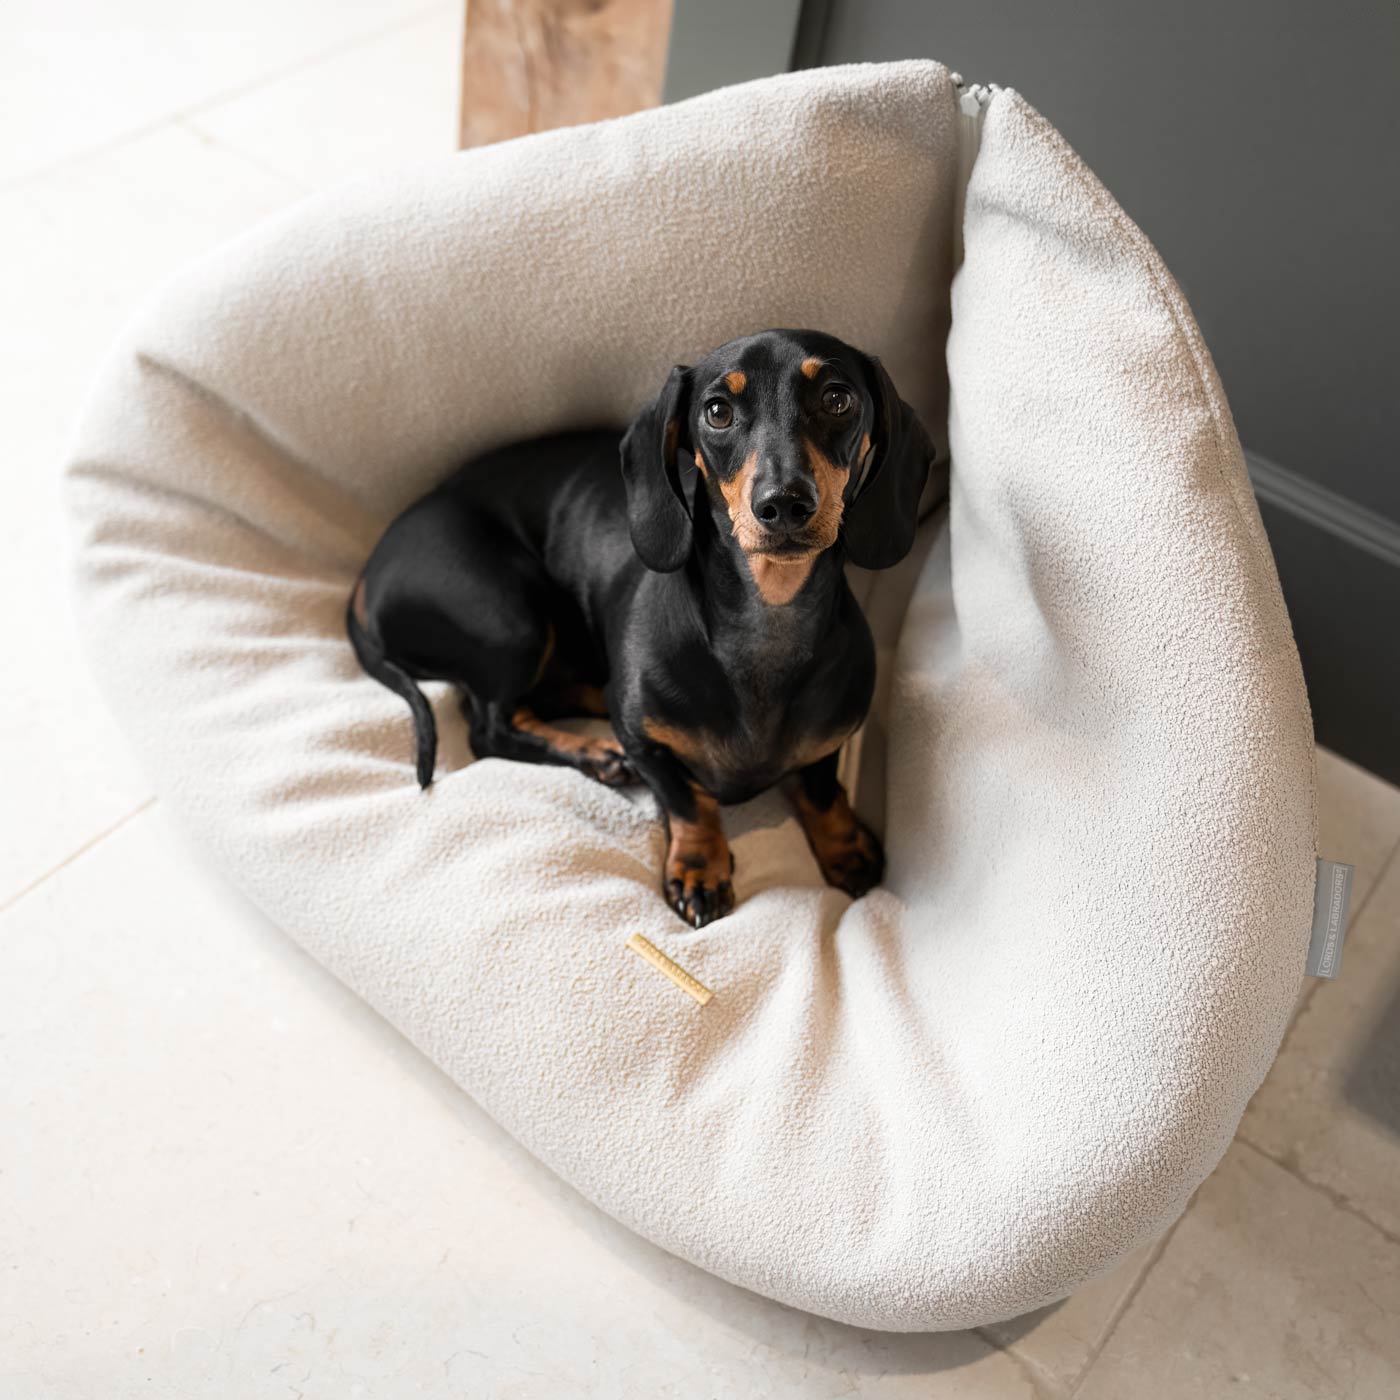 Luxury Dog Cushions & Beds, Squash 'Em in Alabaster, The Perfect Snuggly Cave For Dogs To Burrow! Available Now at Lords & Labradors